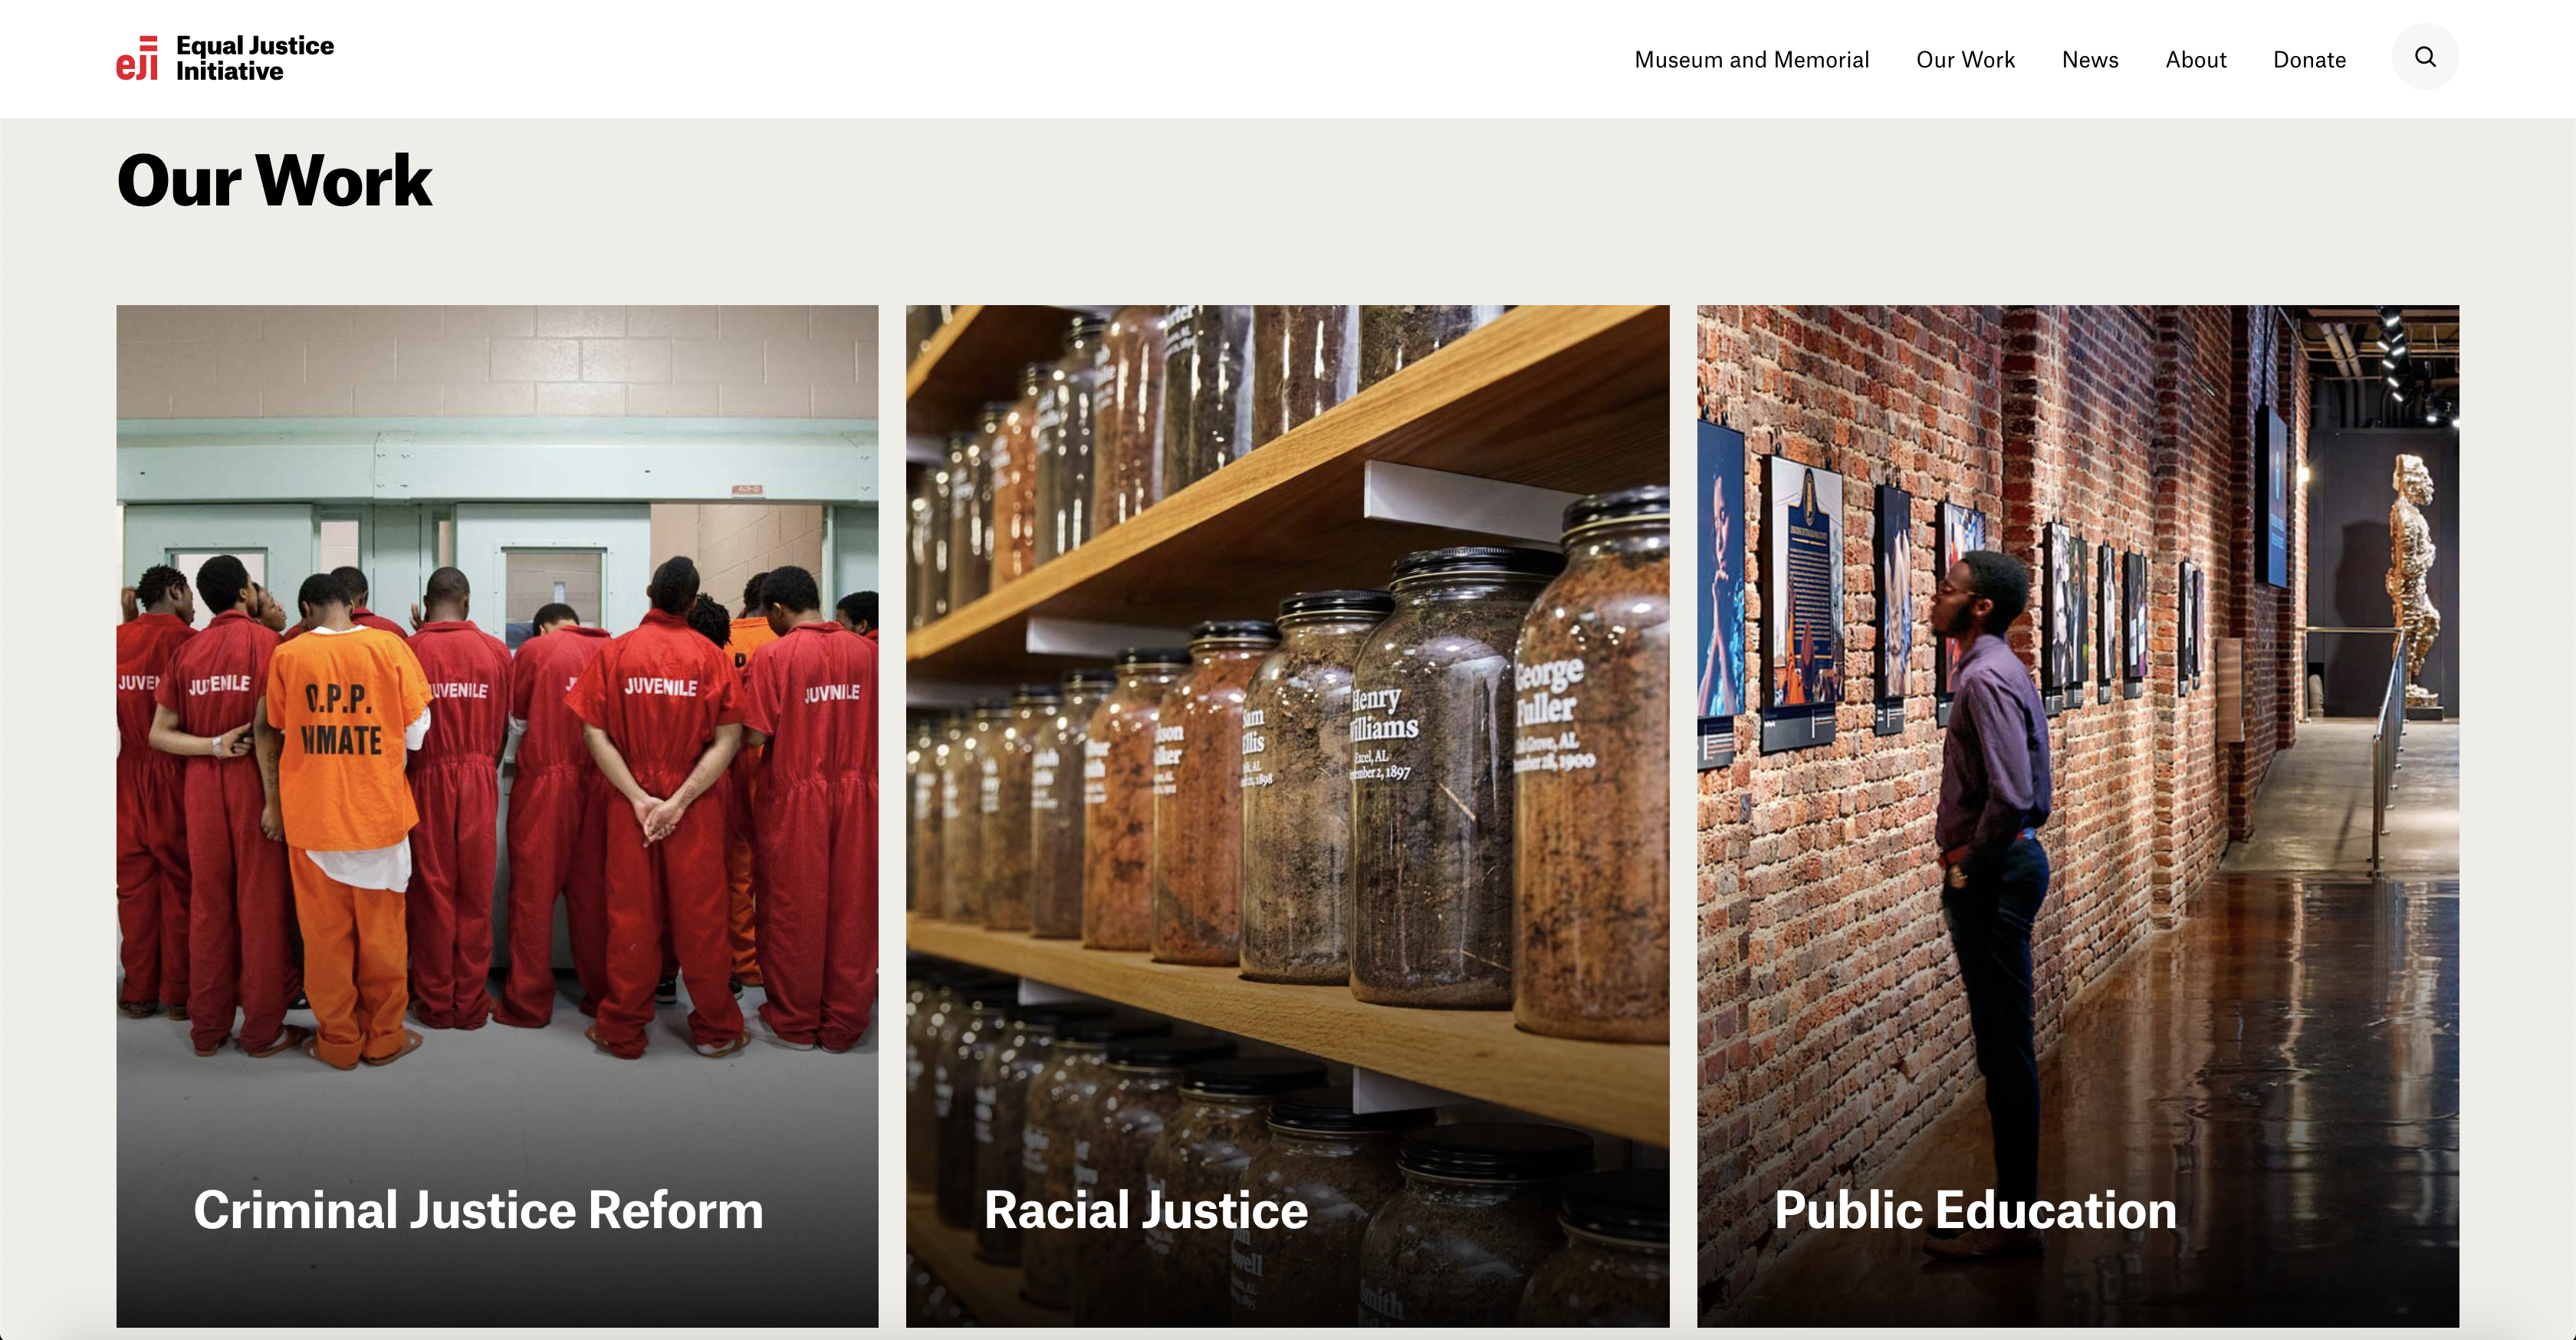 The visualization and messaging around the organization’s core programs on the homepage are subtle and minimalist